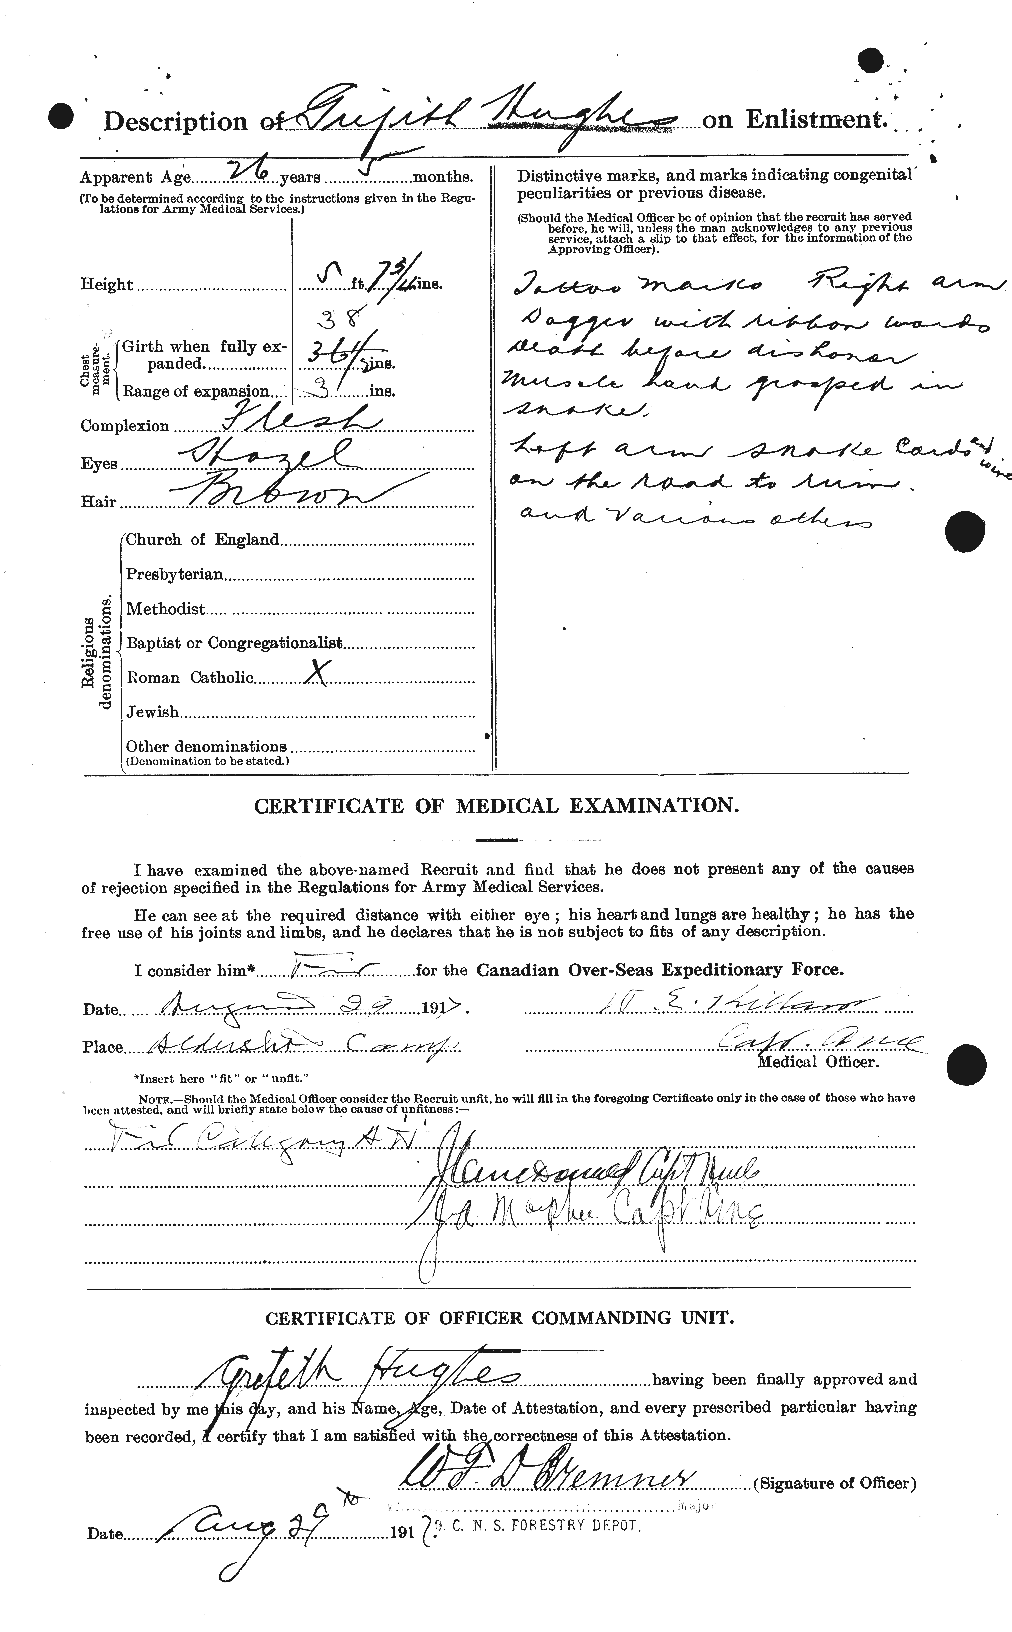 Personnel Records of the First World War - CEF 403851b